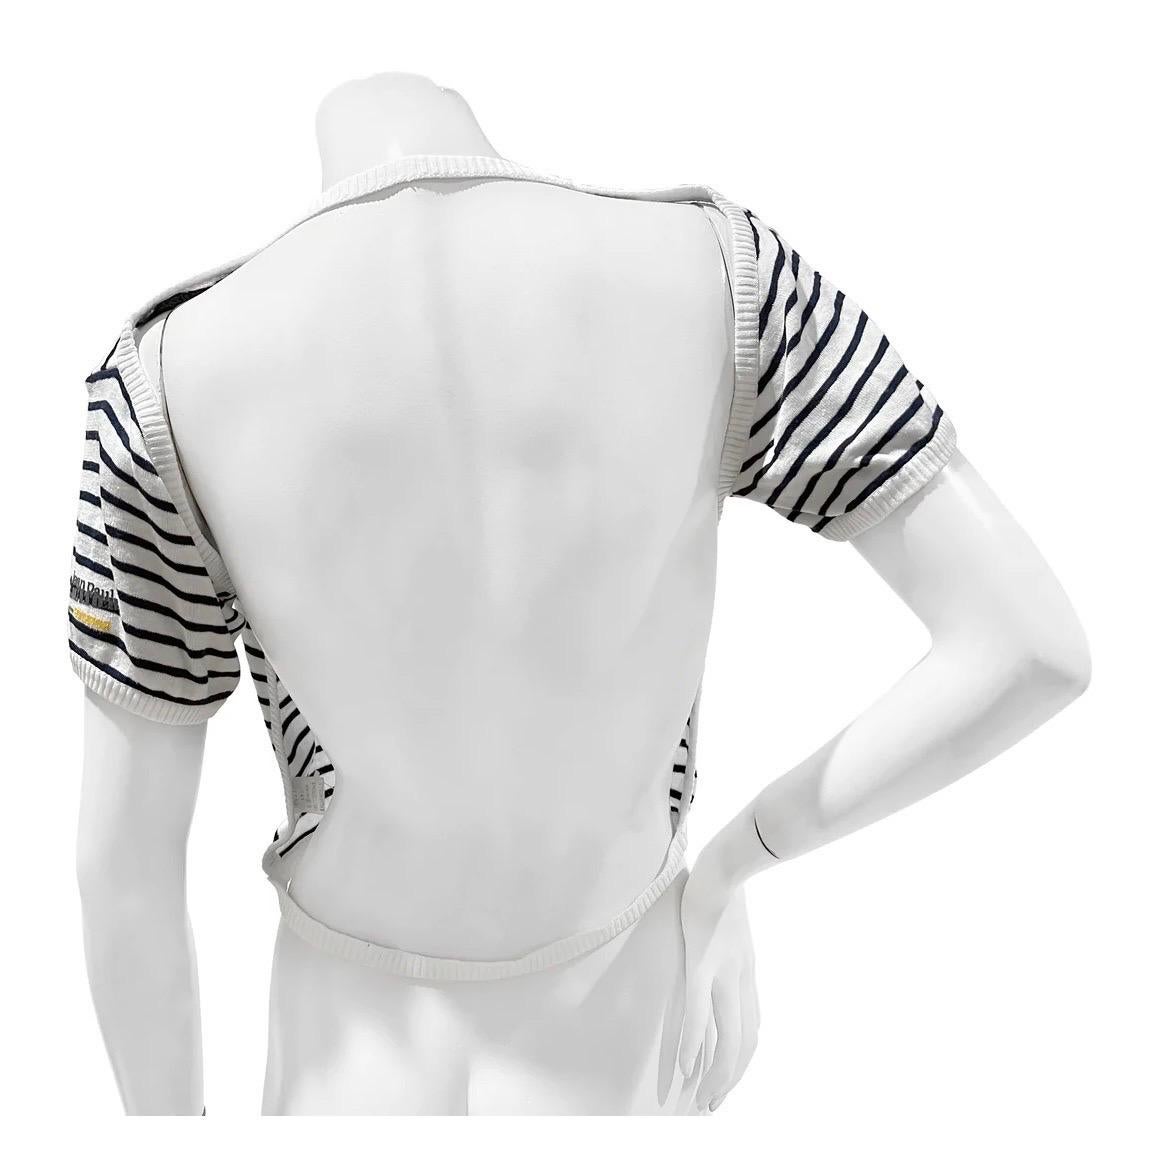 Vintage Striped Backless Cotton Shirt by Jean Paul Gaultier Equator
Circa 1987
Made in Italy
Navy and white stripes
Backless
Short-sleeve 
Ribbed collar, cuffs and waist
Jean Paul Gaultier Logo on left sleeve 
Fabric Composition; 100%